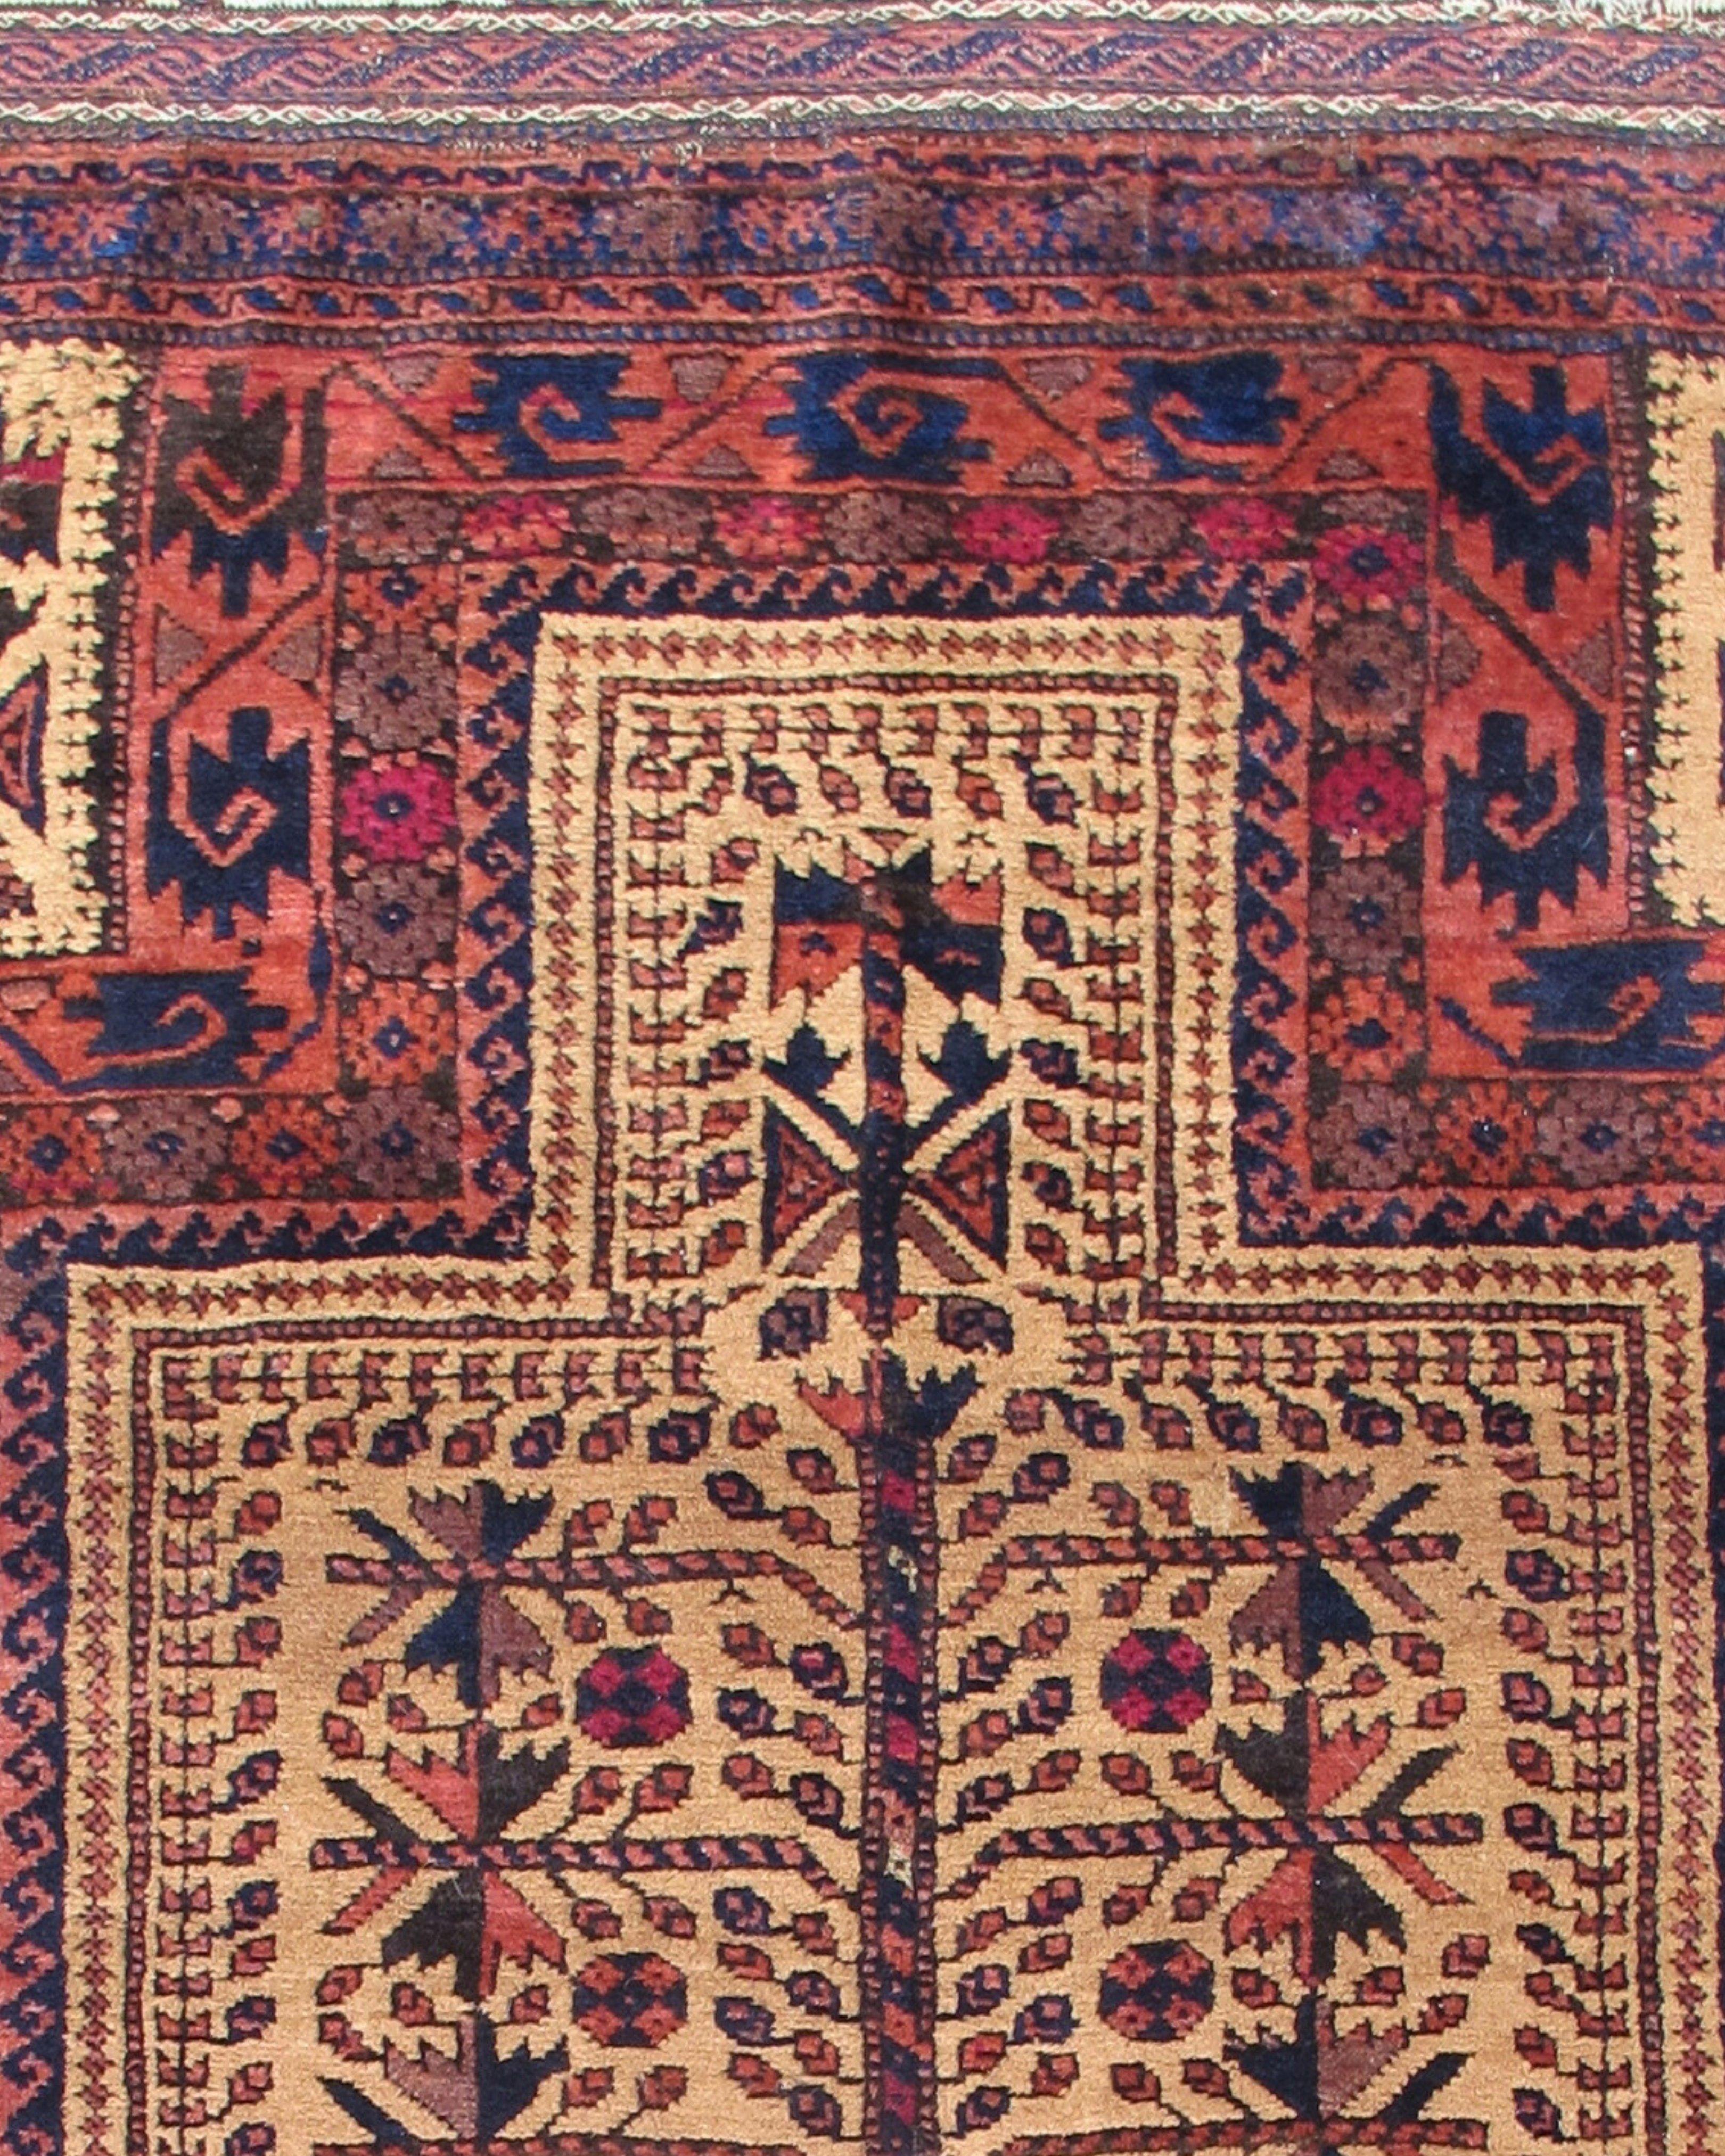 Antique Persian Baluch Prayer Rug, c. 1900 In Excellent Condition For Sale In San Francisco, CA